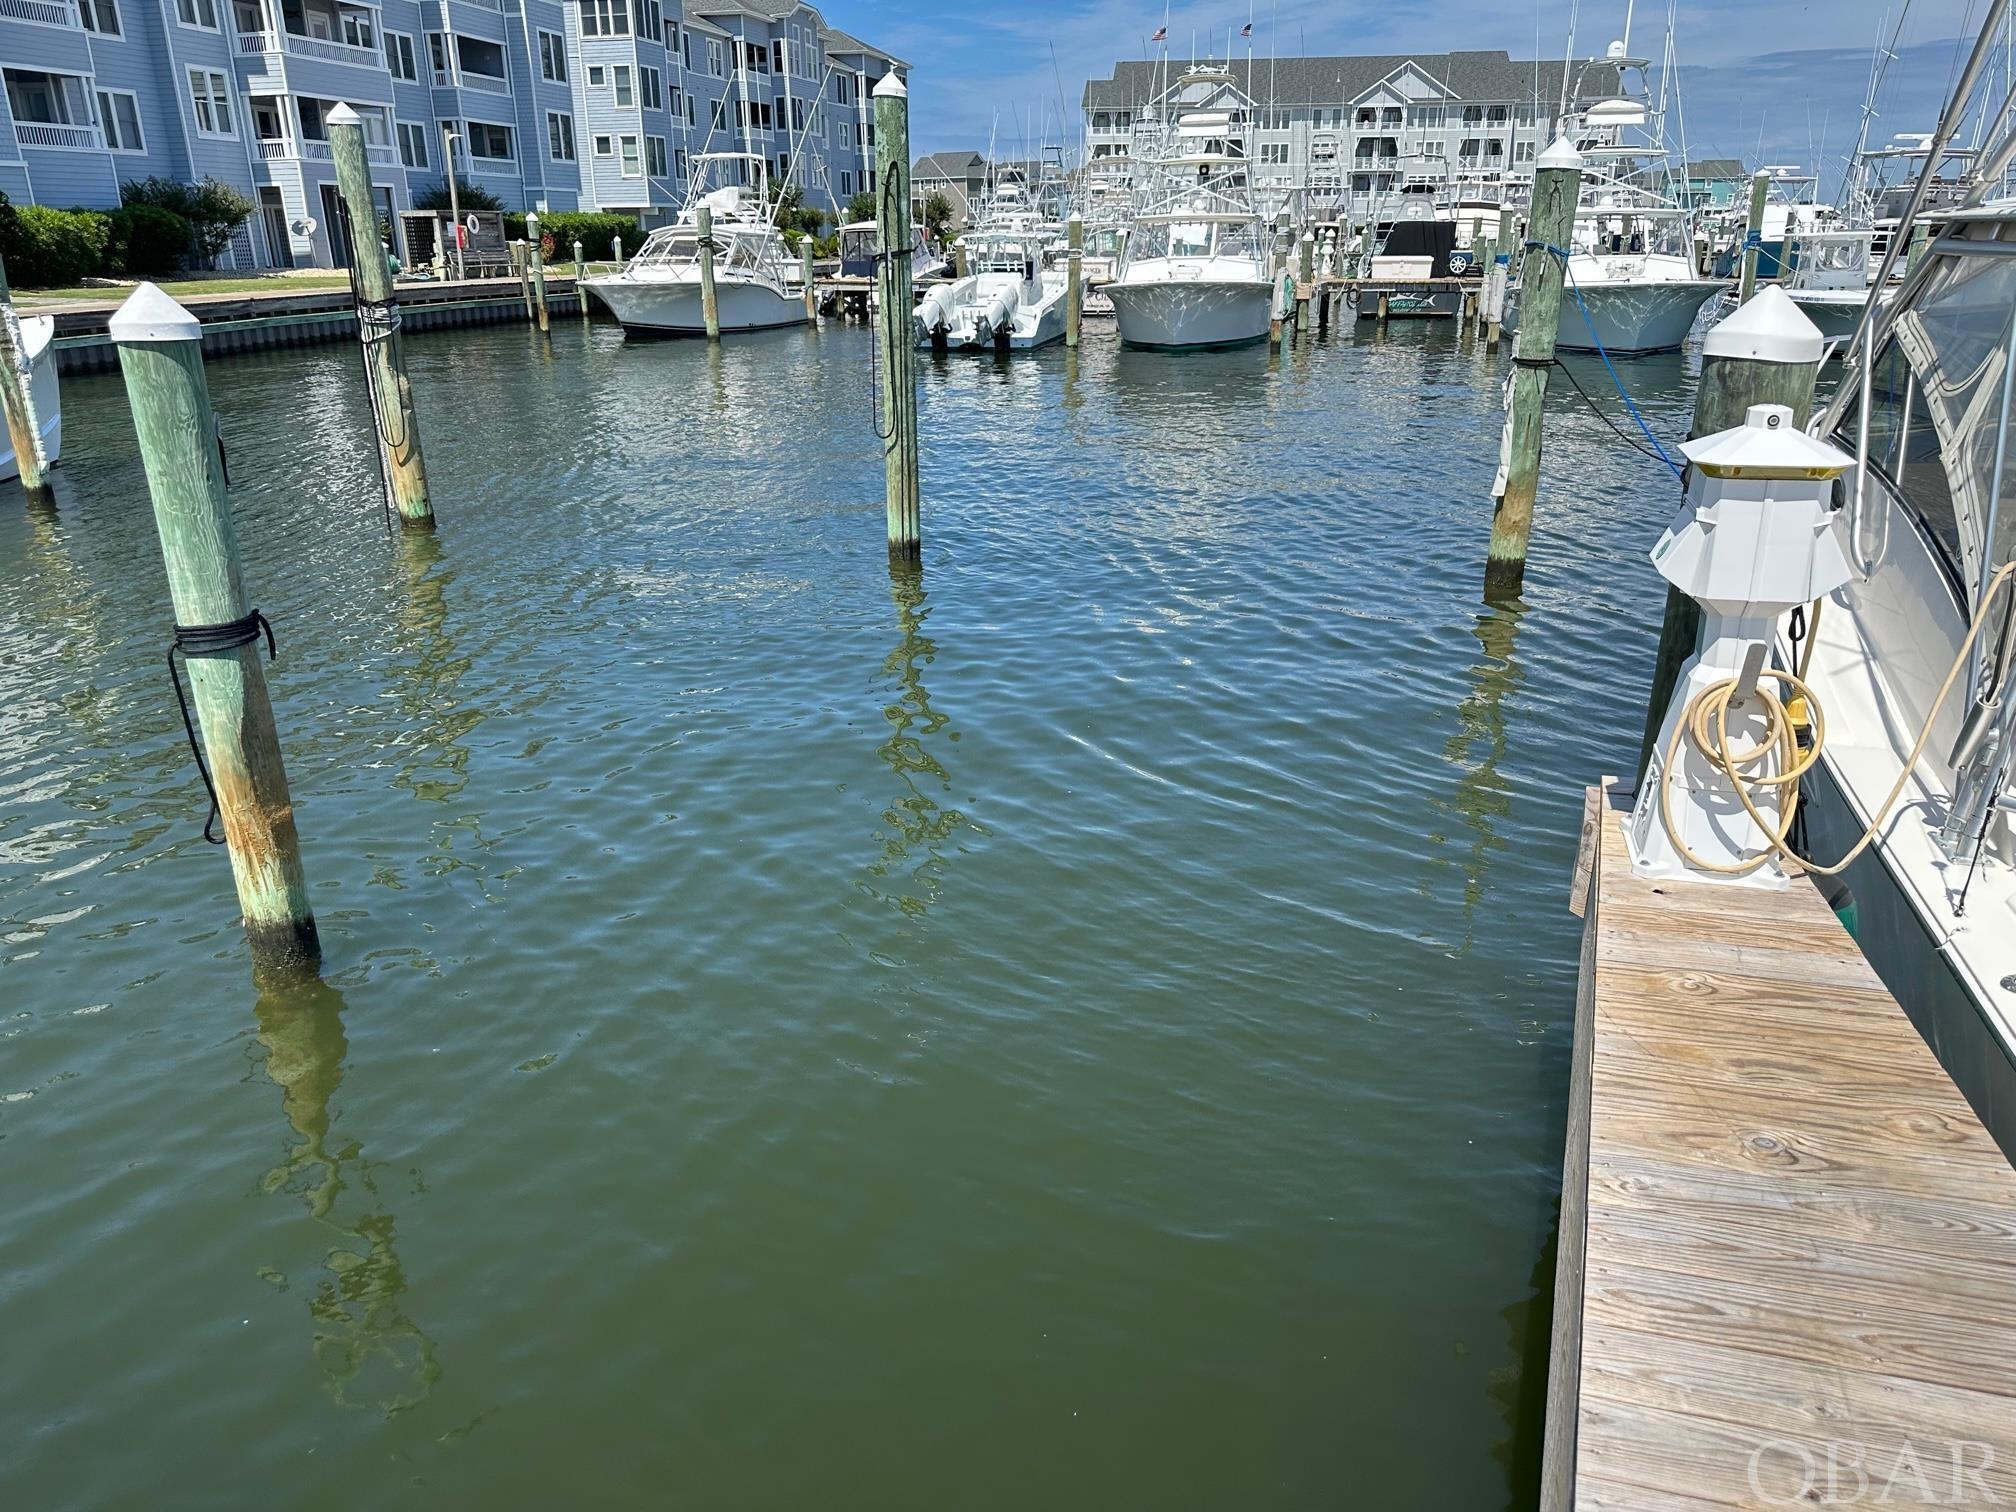 Approximately 45 x 16 boat slip (could handle a 50' boat) with lots of amenities for the whole family, fisherman, or yachtsman. On-site facilities, restaurant and tiki bar, excellent marina, deep water, protected, world-class fishing, tournaments, fuel, and lots more.